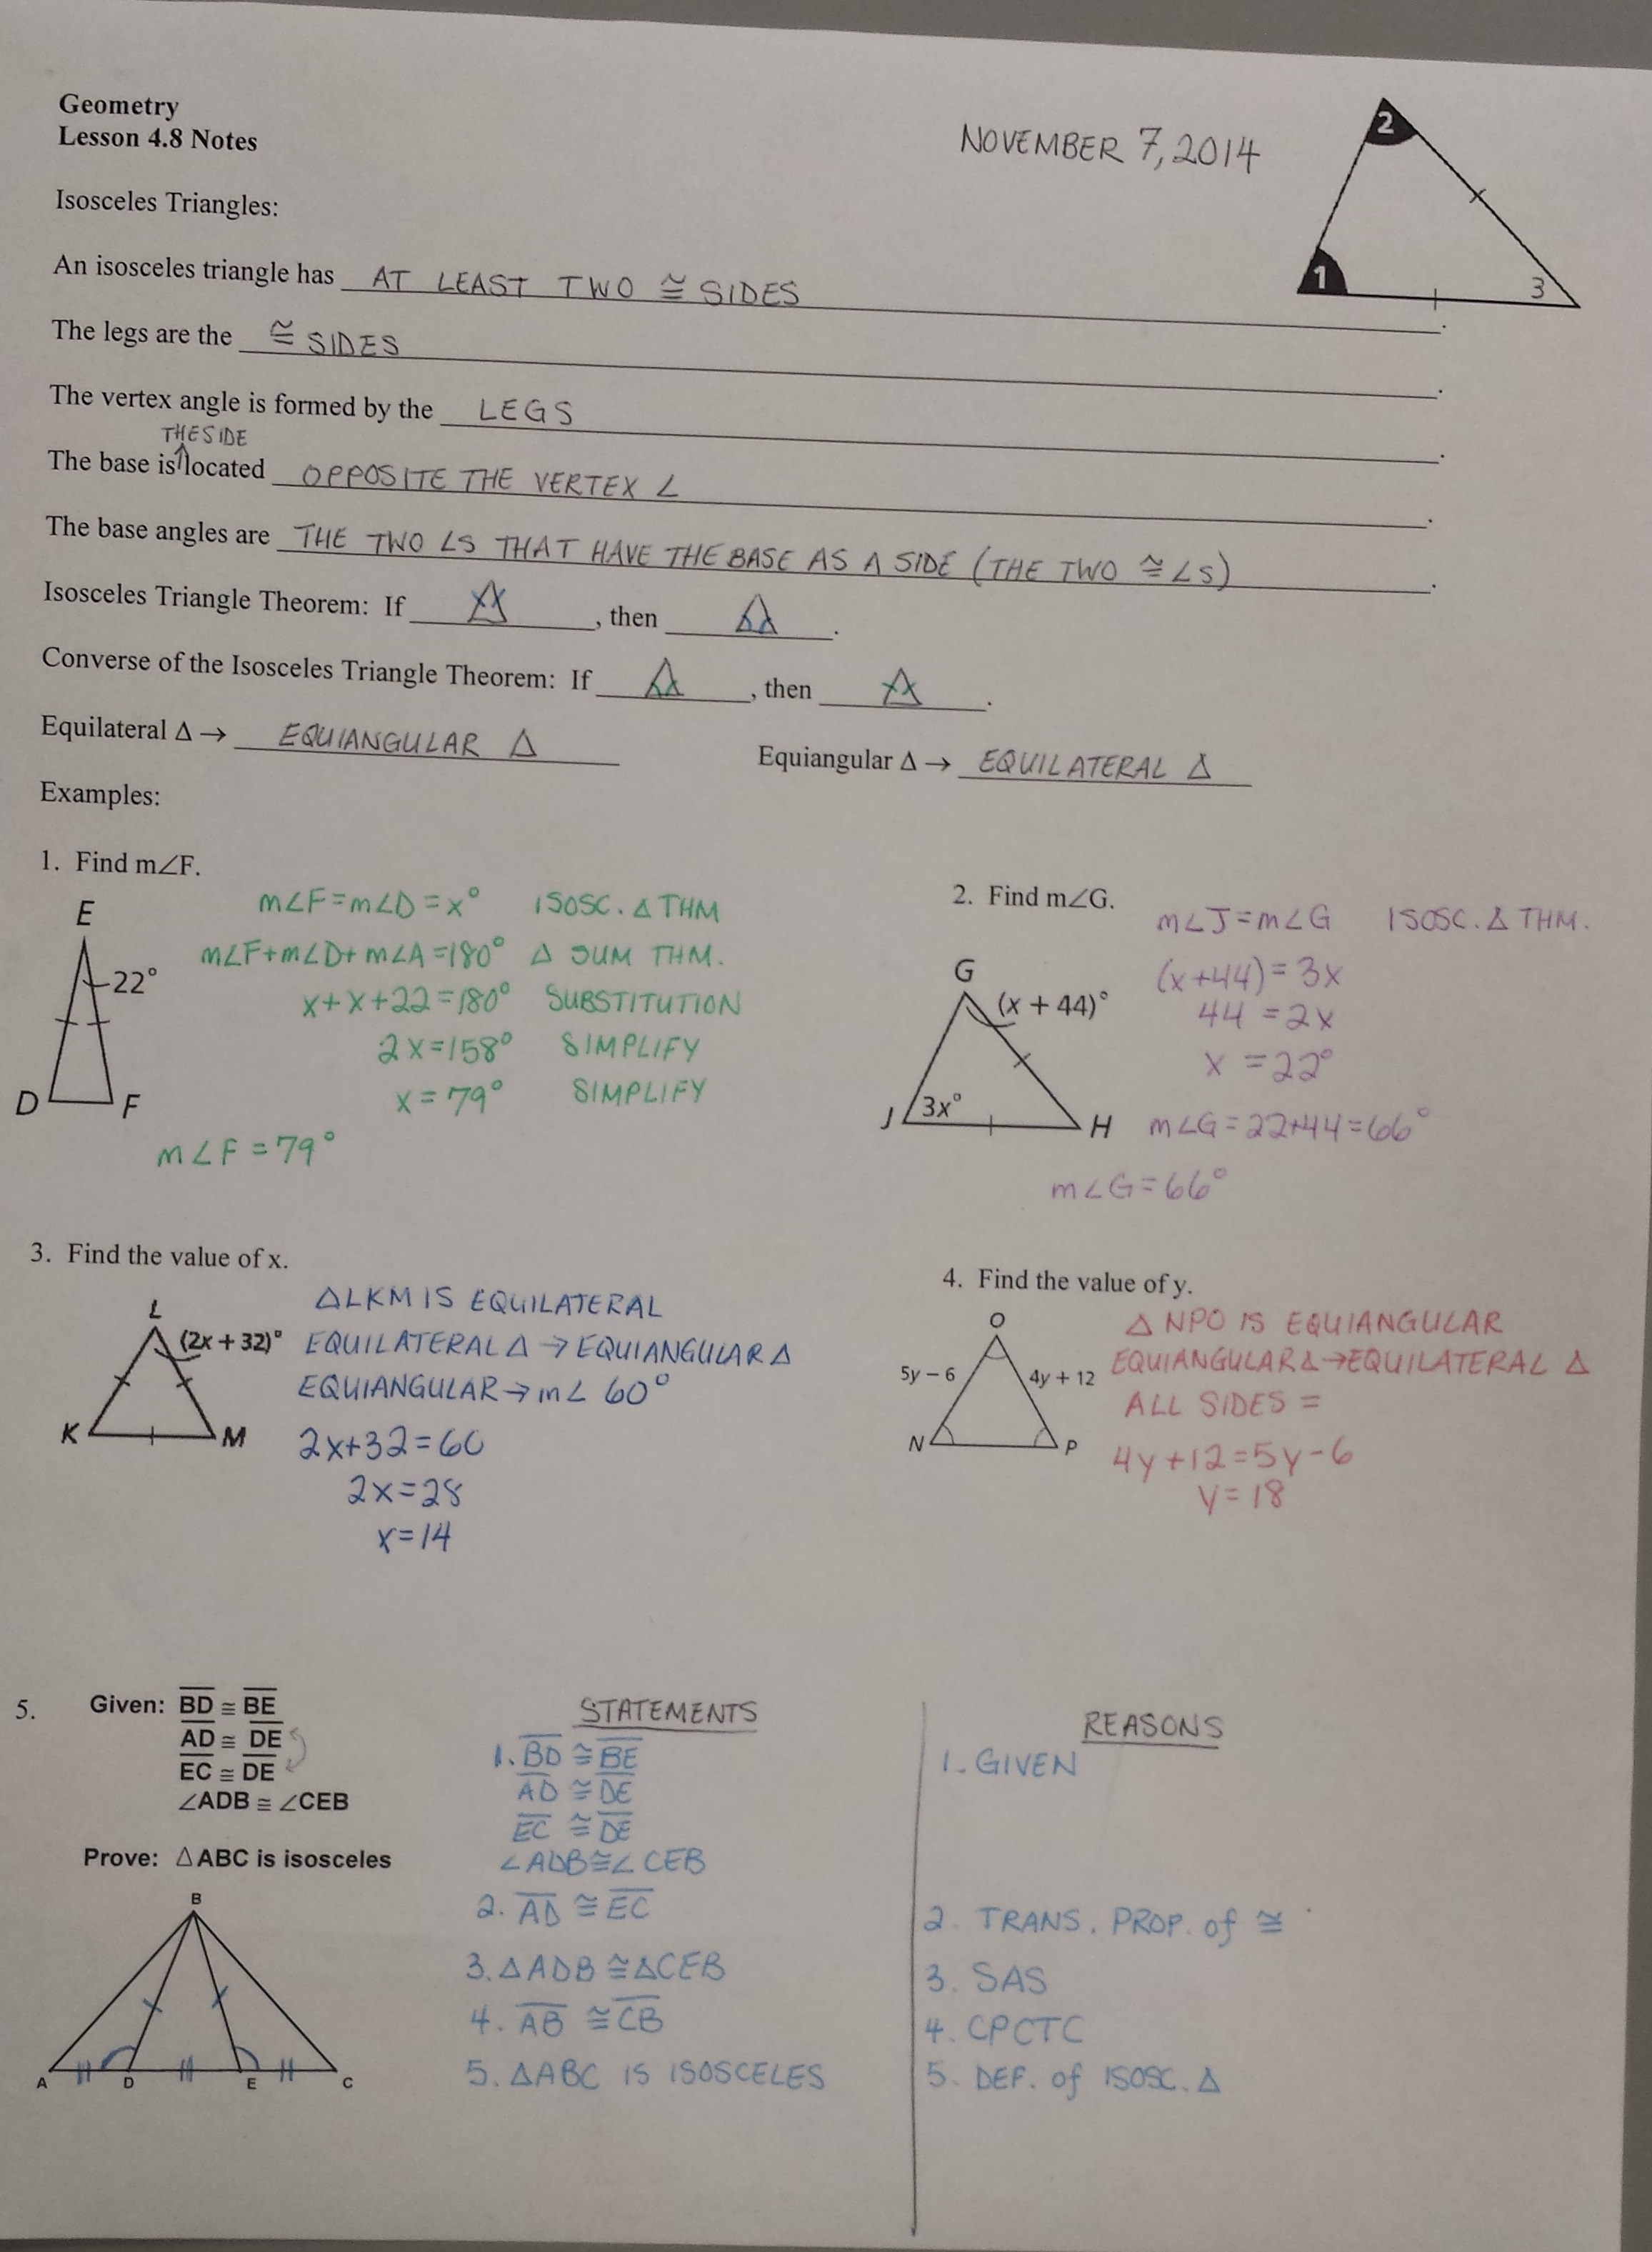 Practice 4 4 Using Congruent Triangles Cpctc Worksheet Answers Cpctc Proofs Worksheet 1 